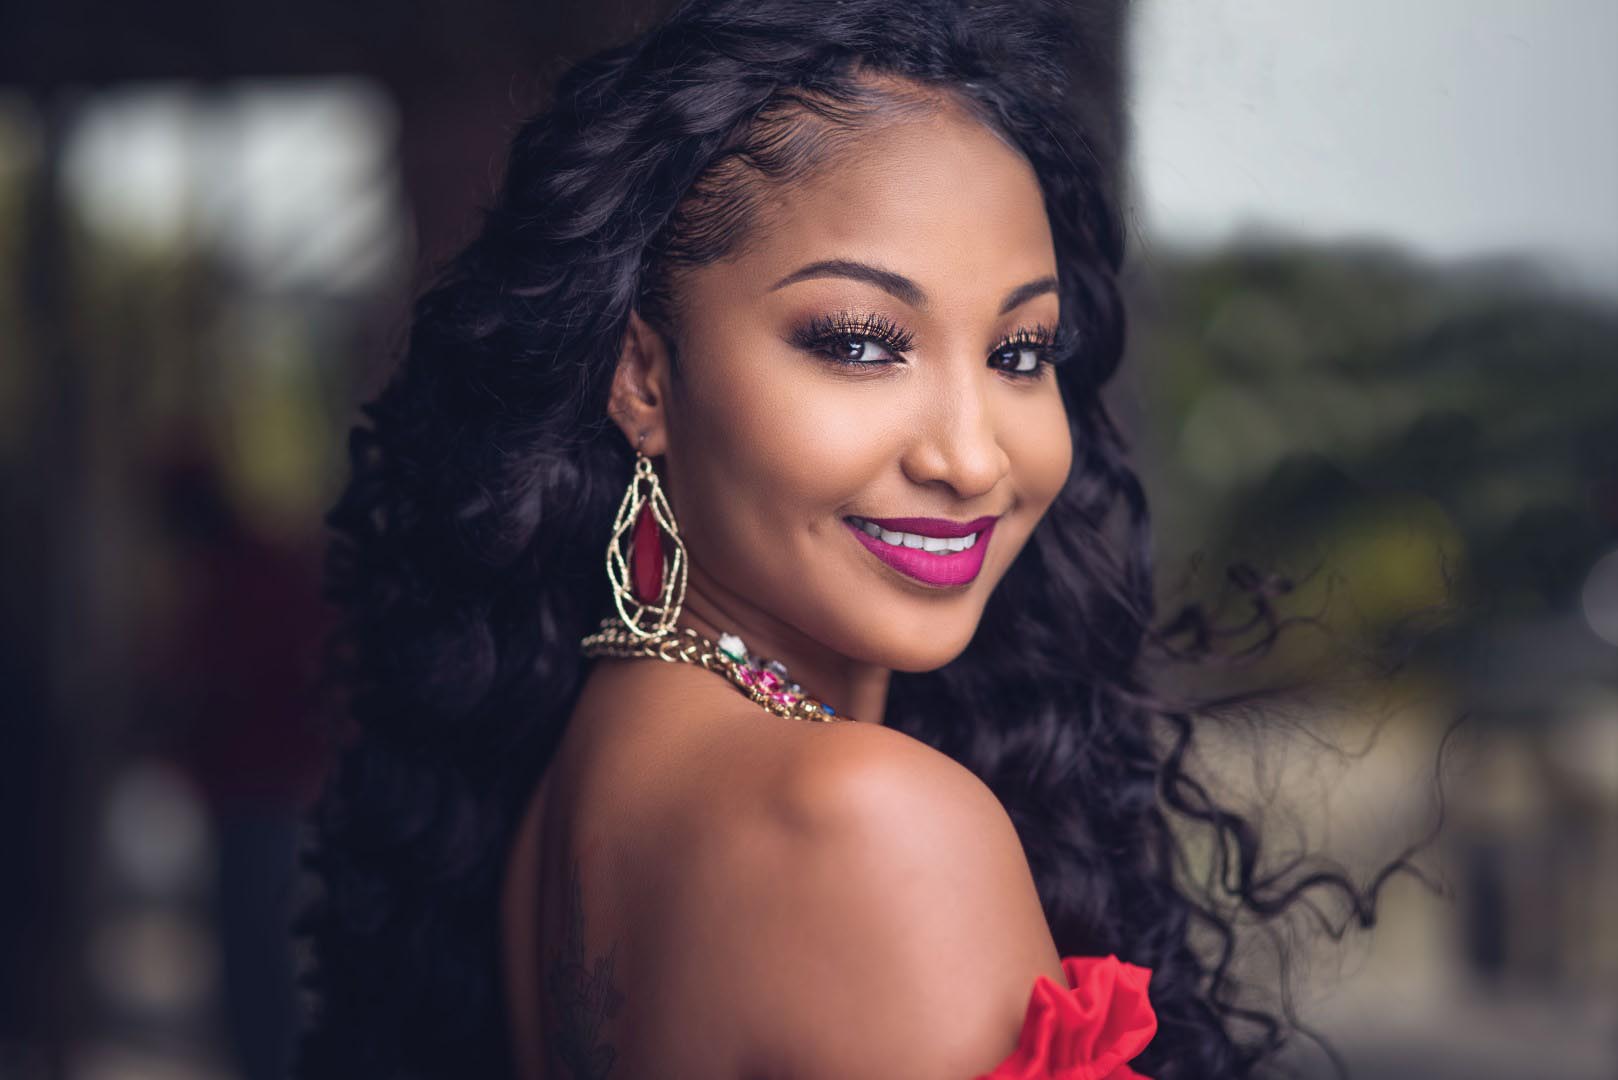 having their egos stroked Throwback: Shenseea - The World is Hers for the Taking